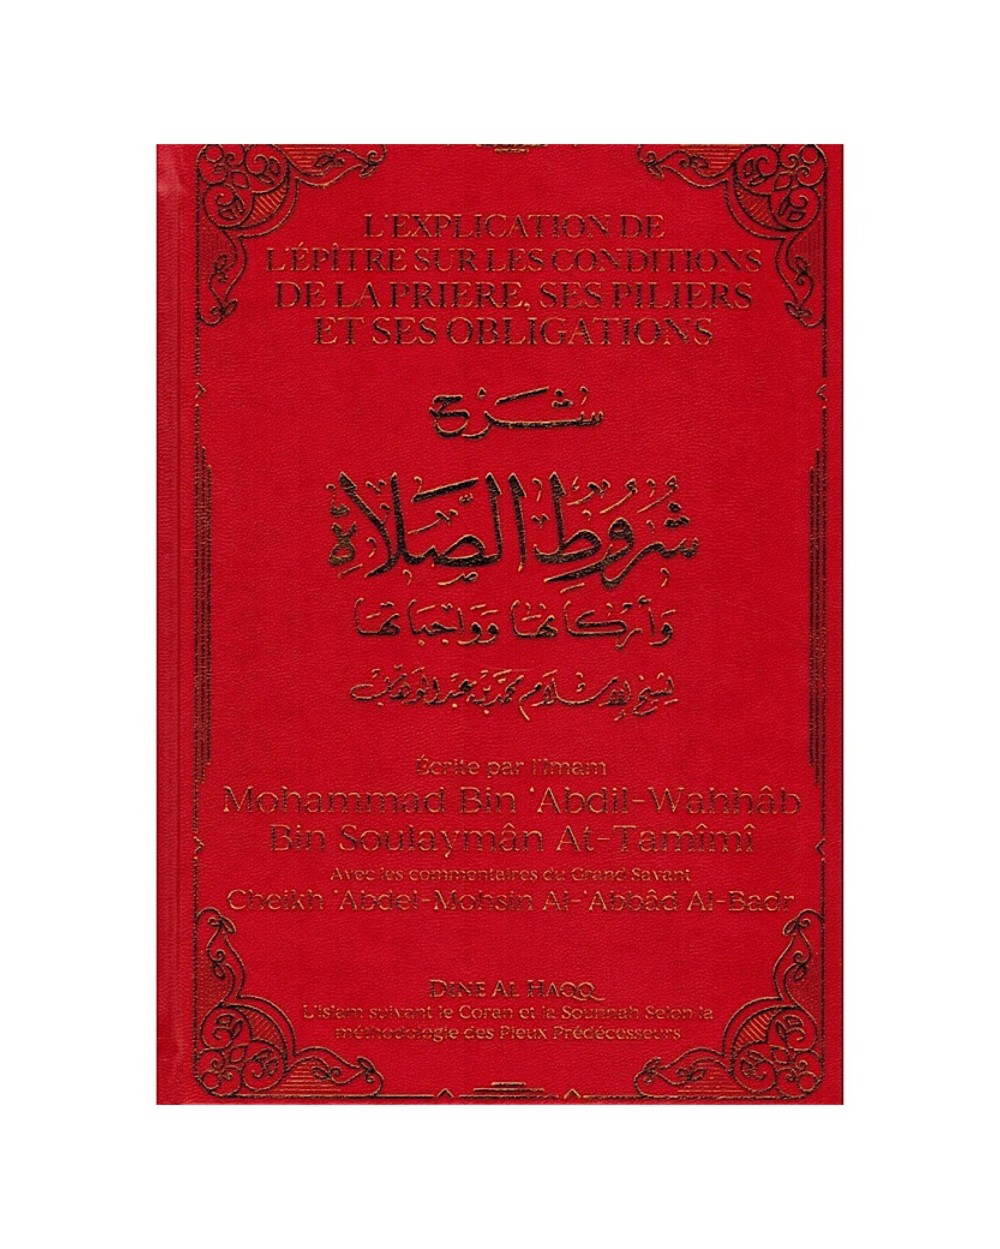 Book the explanation of the epistle on the conditions of the prayer, its pillars and its obligations